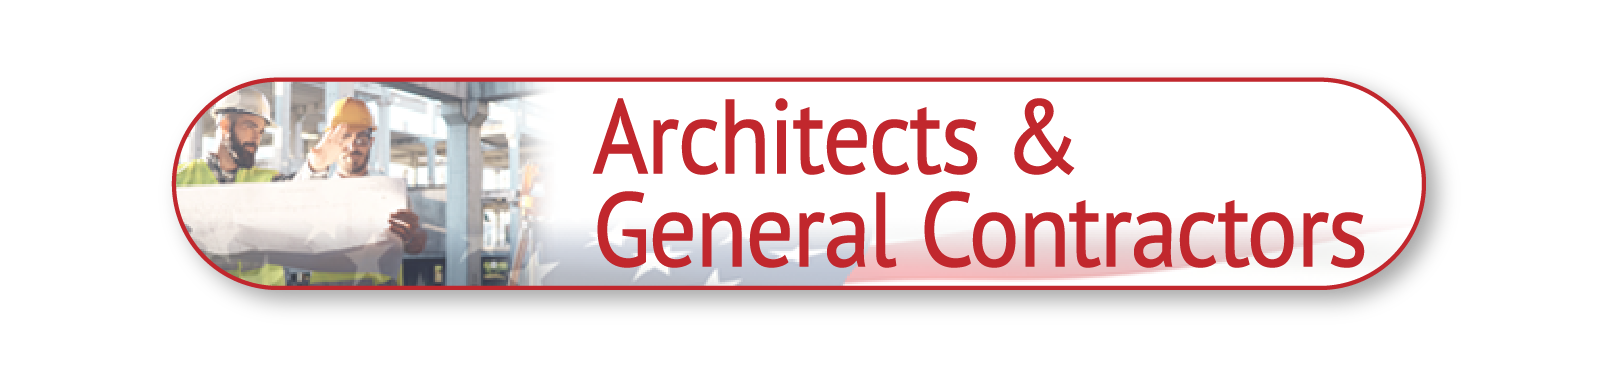 Architects & General Contractors